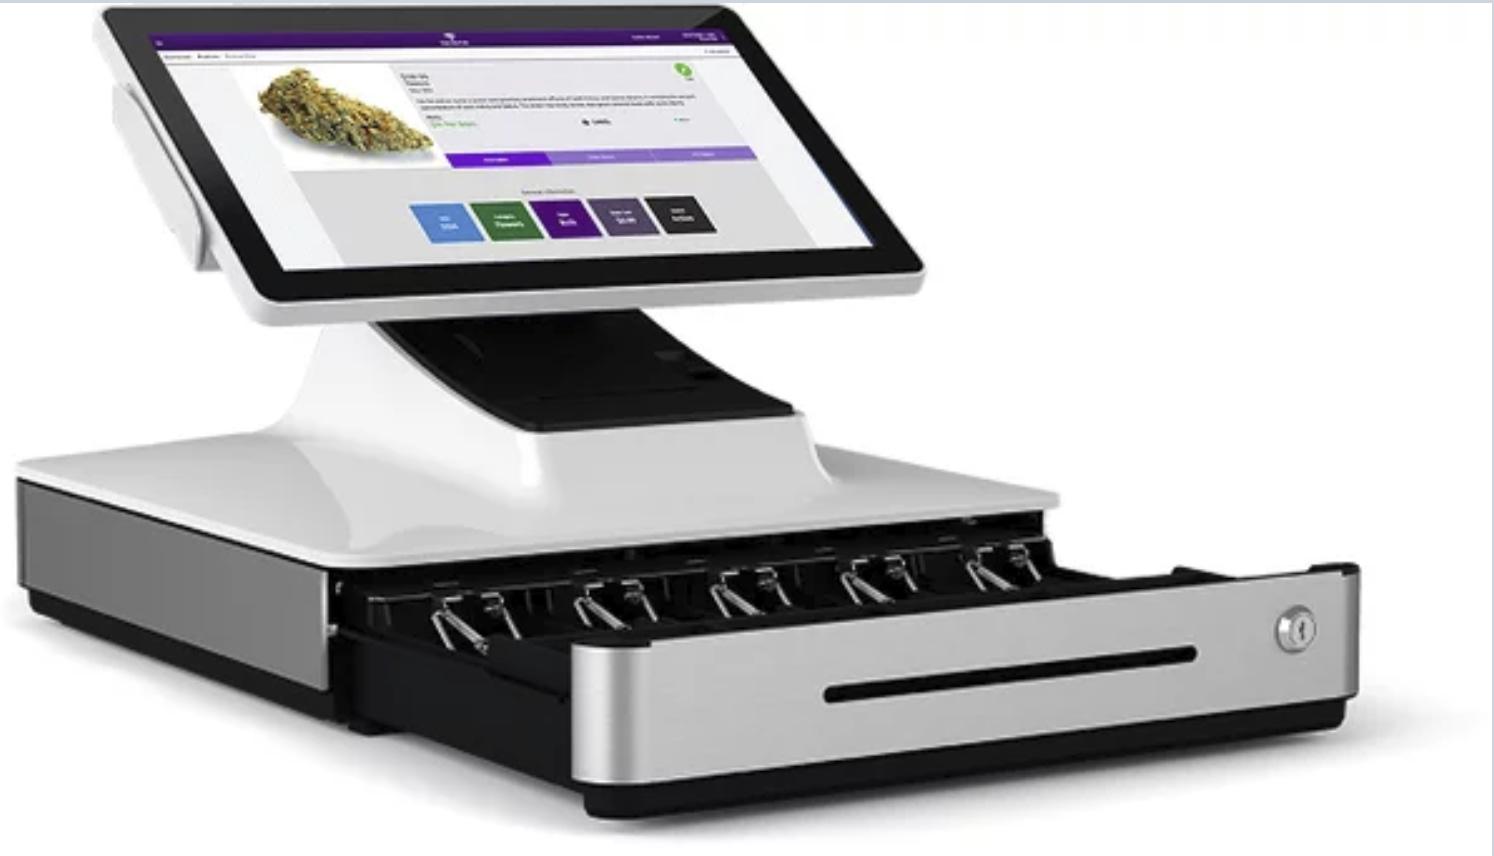 7 Factors To Consider Before Choosing a Cannabis POS System for your Cannabis Store